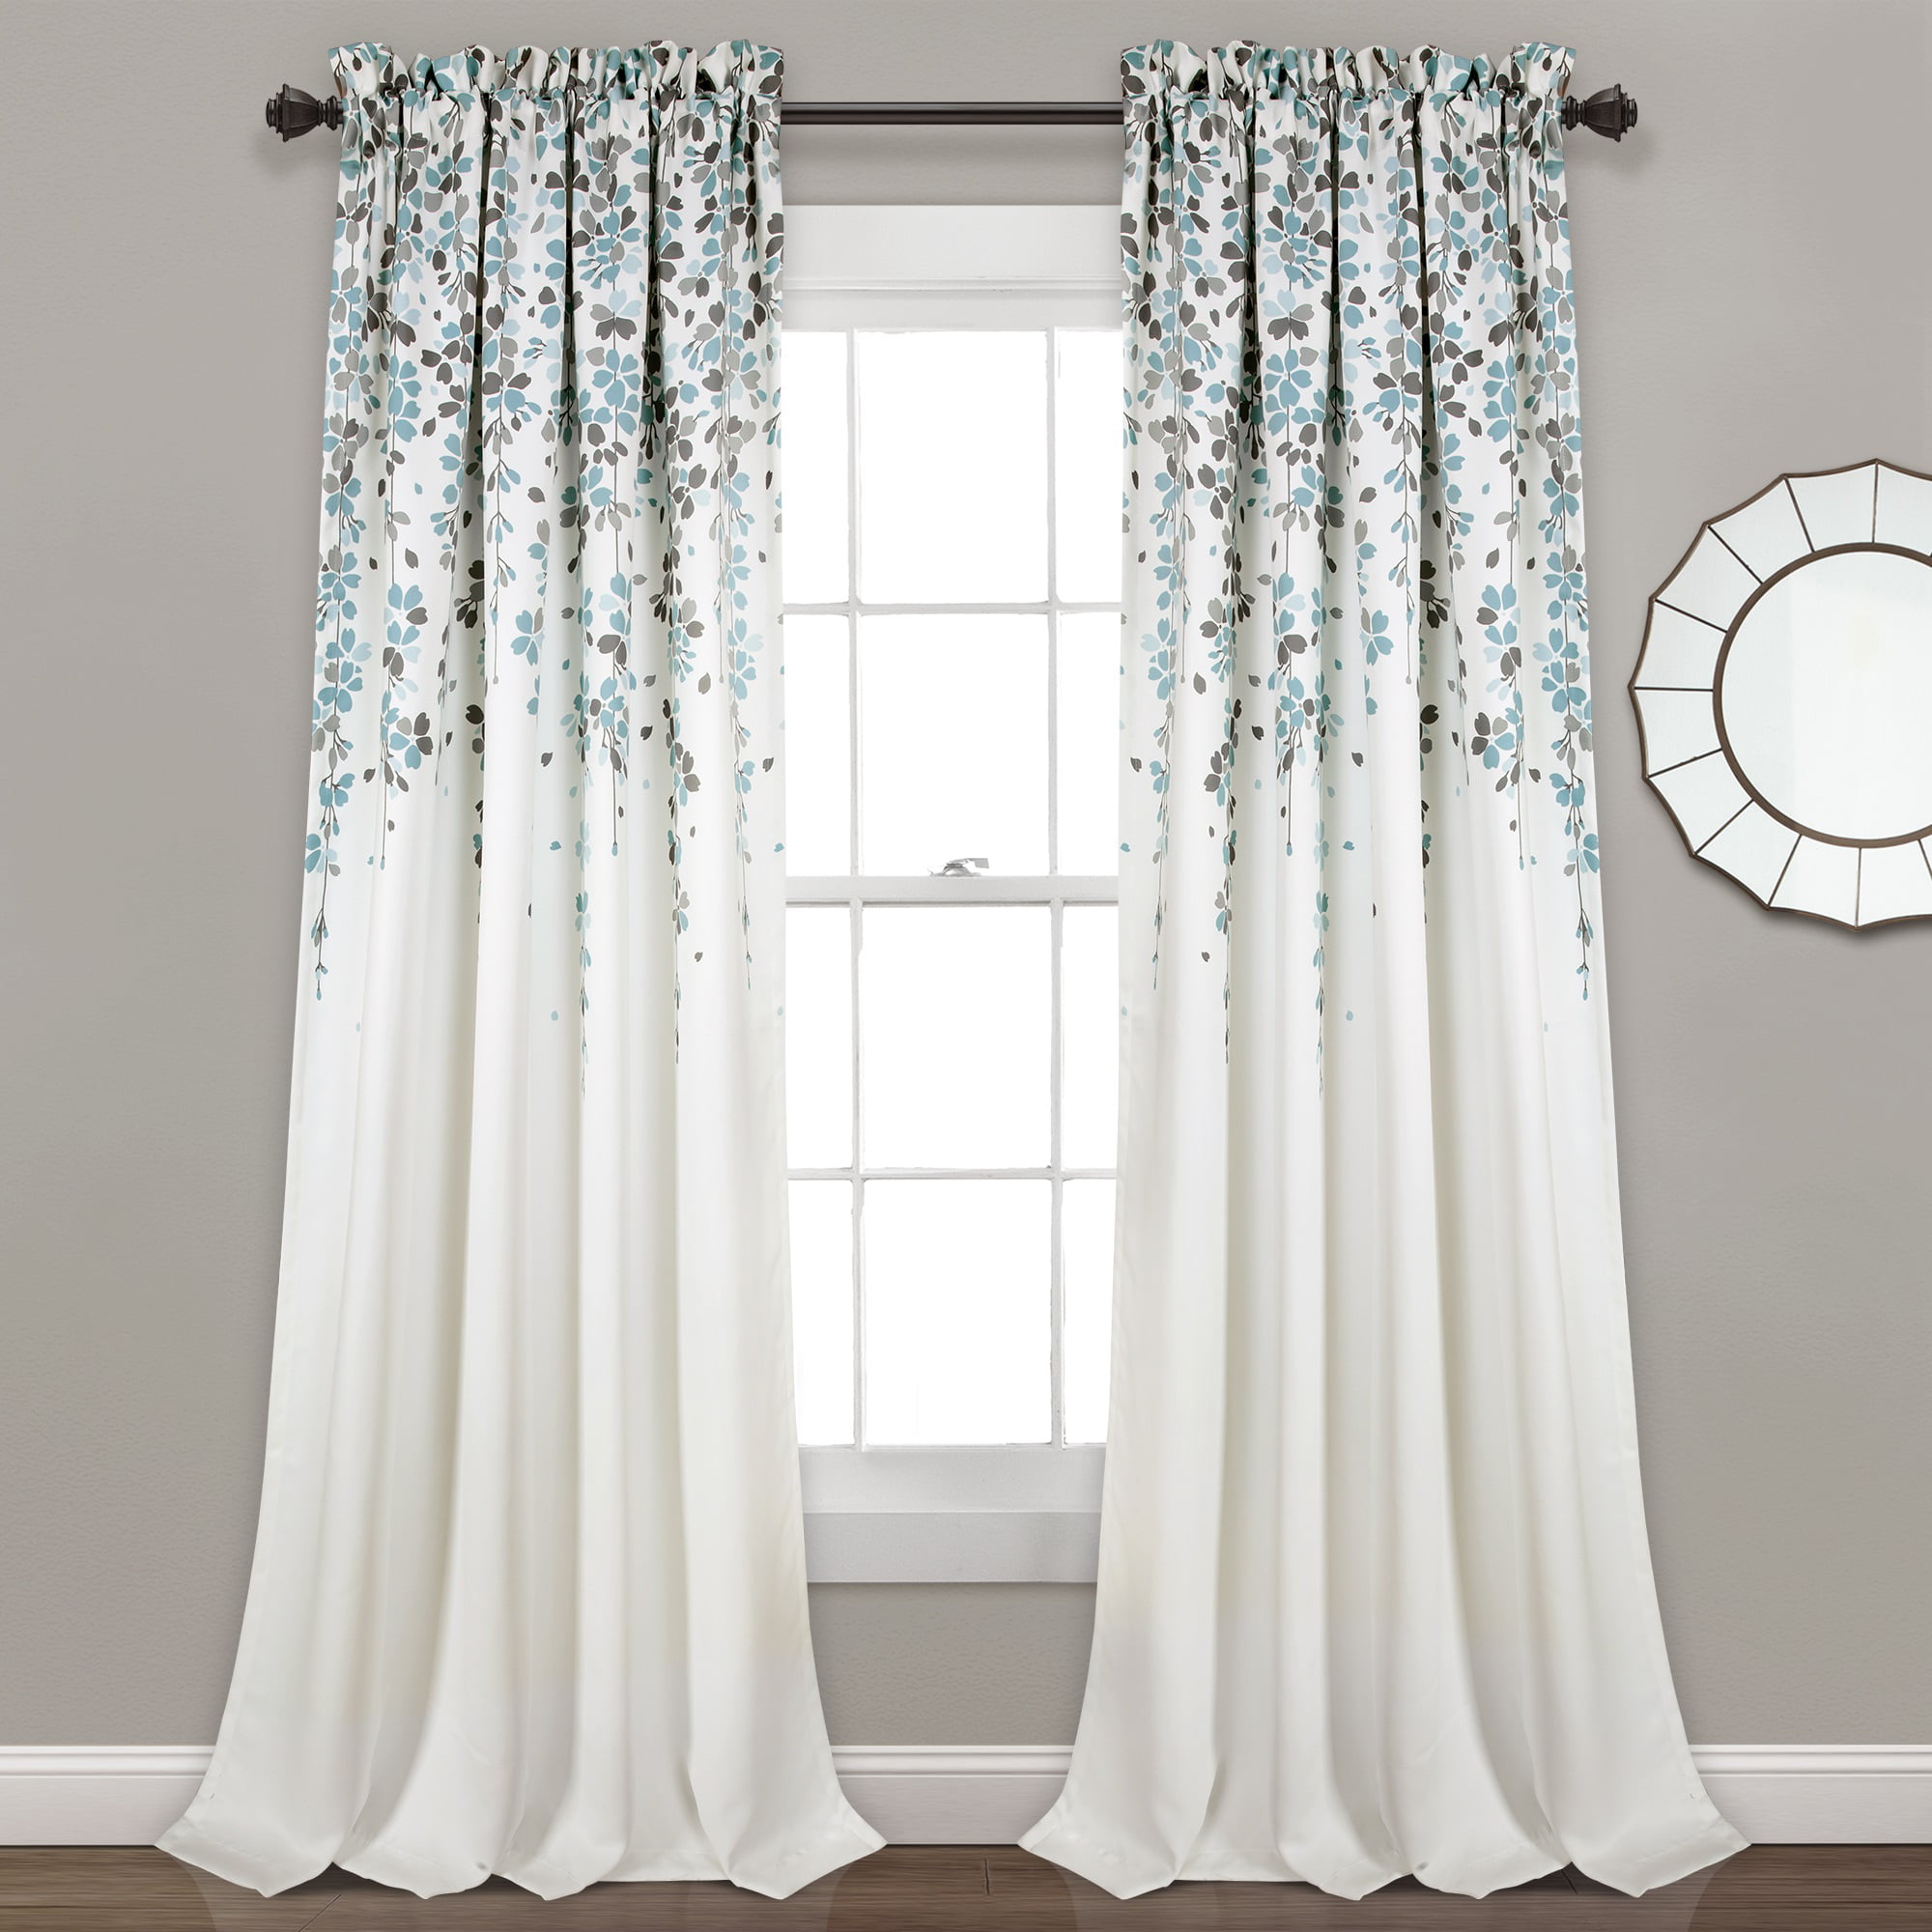 2 Panels 52 x 63 inch FLOWEROOM Room Darkening Curtains Thermal Insulated Blackout Curtain for Bedroom Greyish White